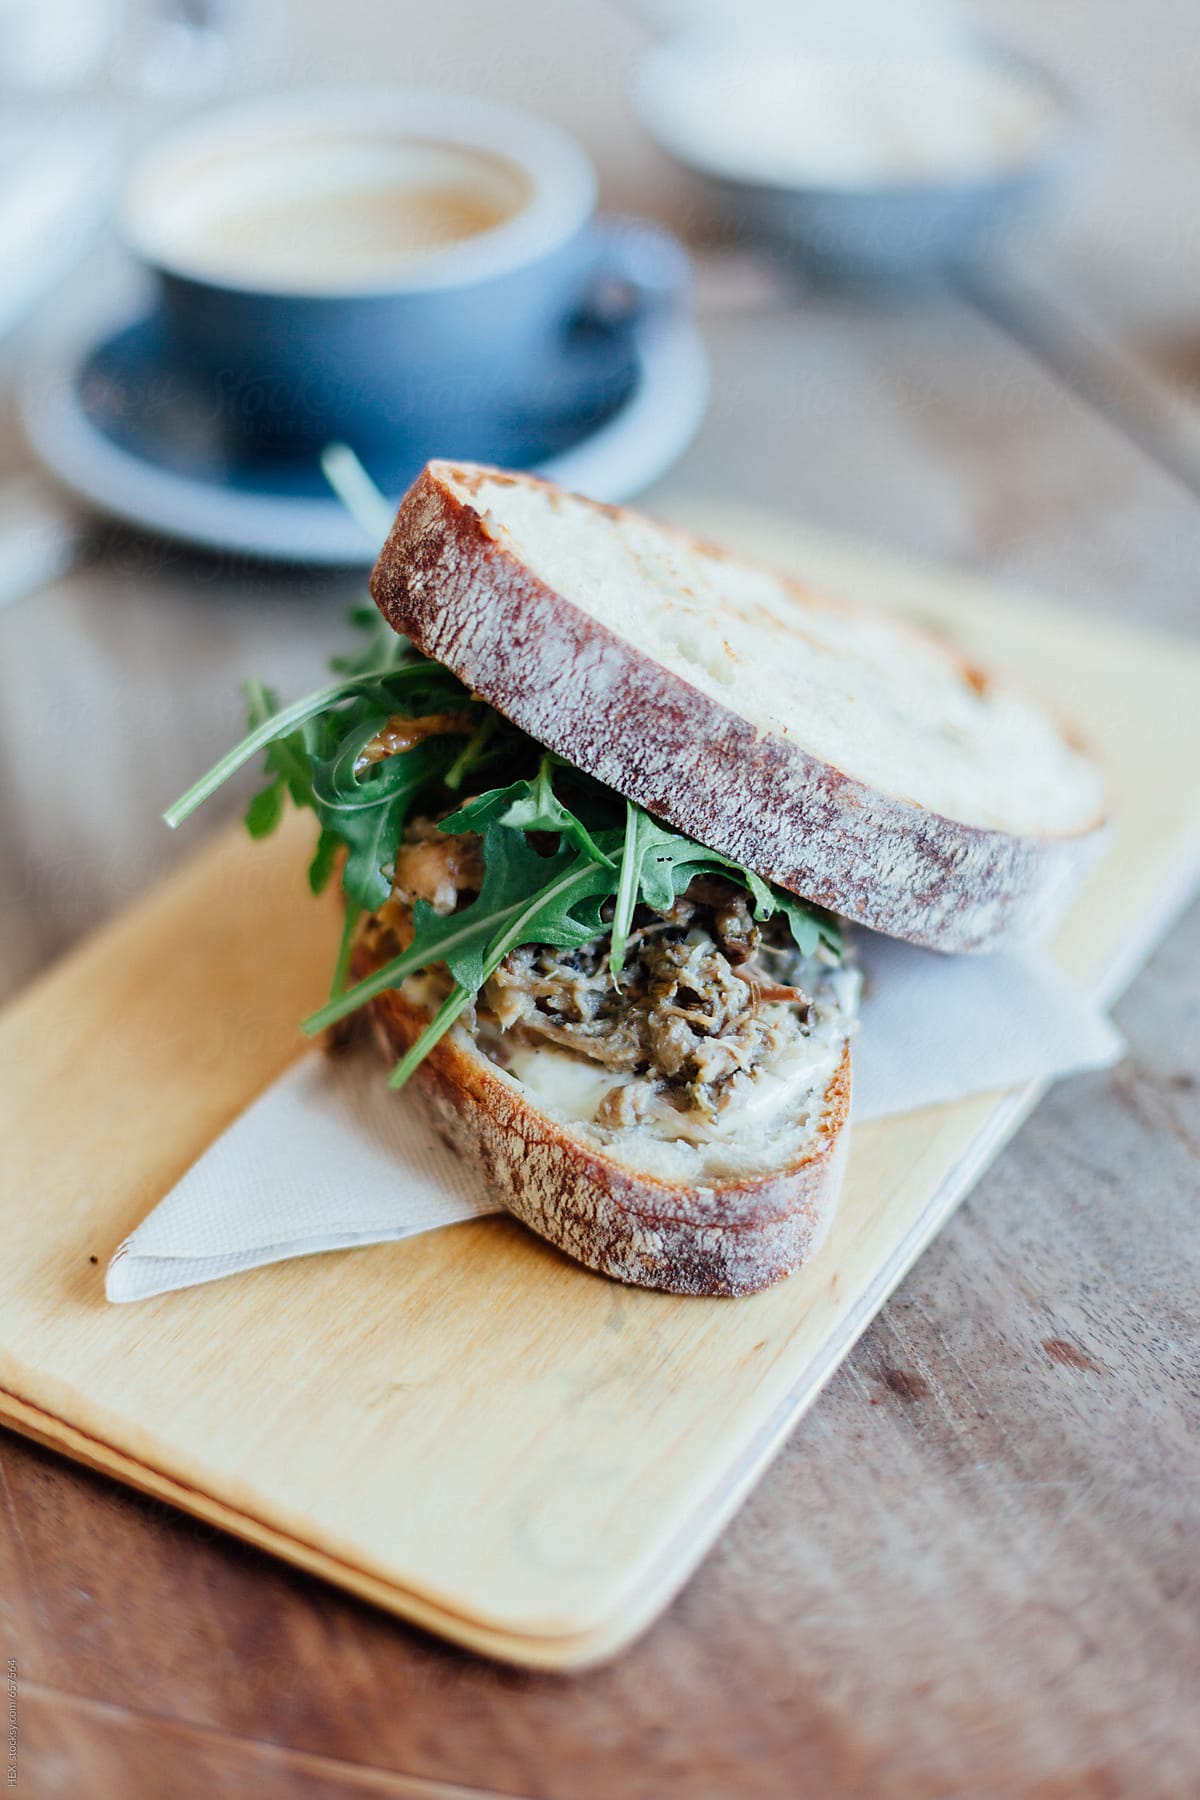 Sandwich With Pork and Rocket Salad